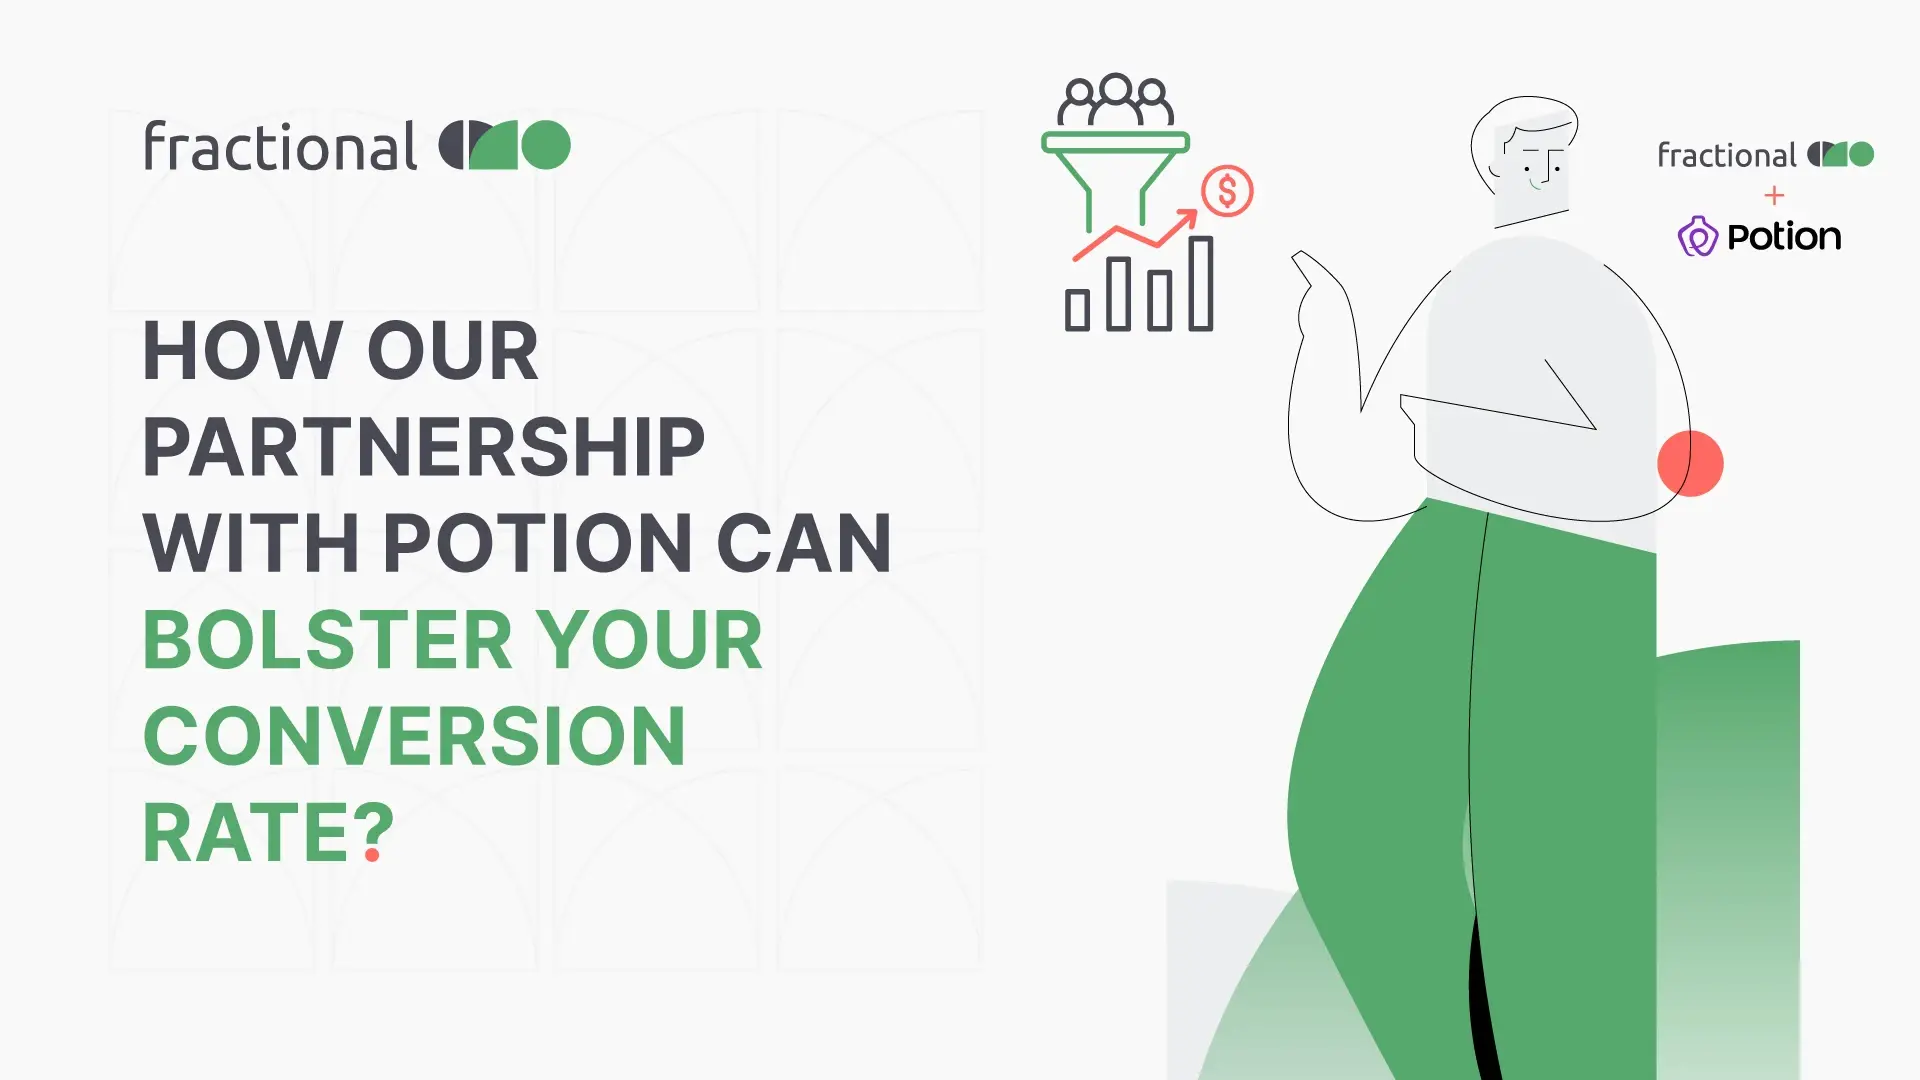 How our partnership with Potion can bolster your conversion rate?